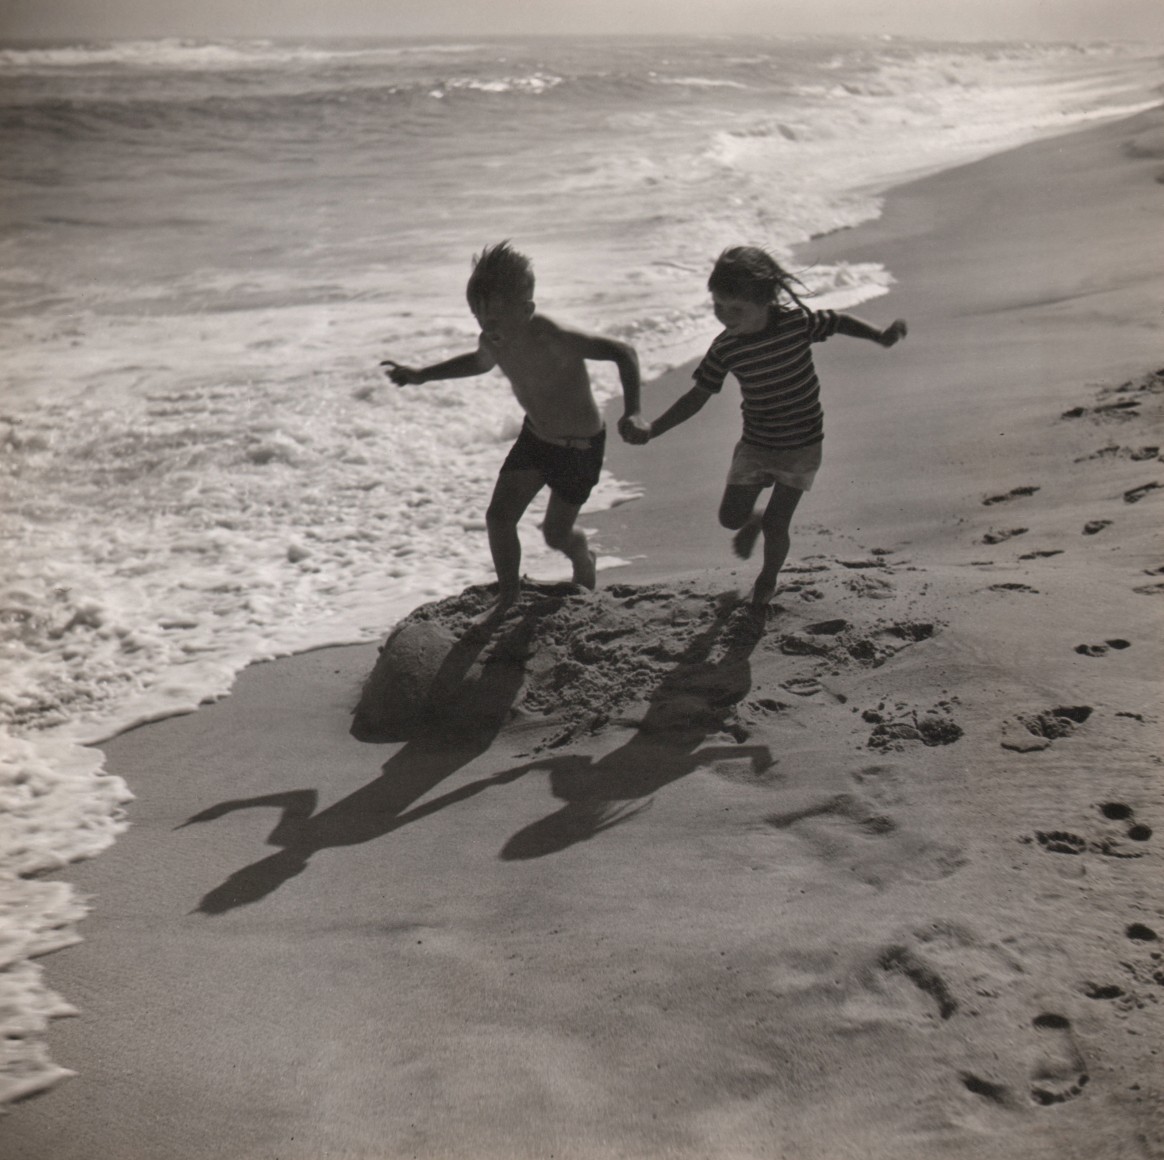 45. Toni Frissell, Untitled, c. 1947. Two children holding hands and running on the beach. The frame is divided from lower left to upper right by the sea meeting the sand.